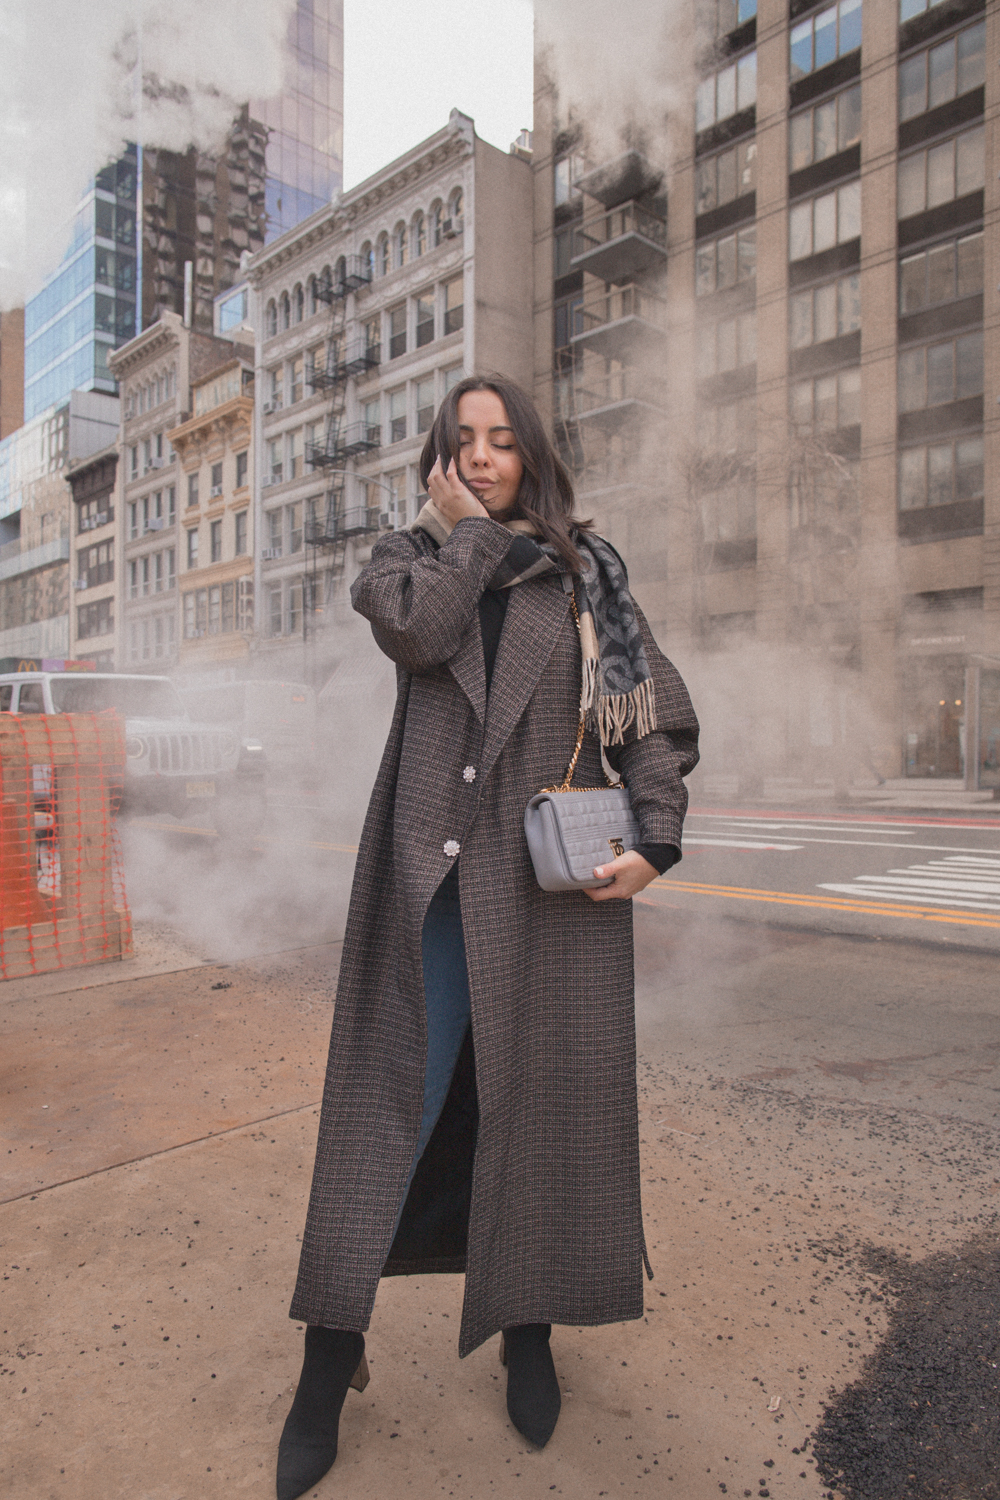 NYC Winter Outfit Inspirations You Need in 2023 - The Ultimate Guide 